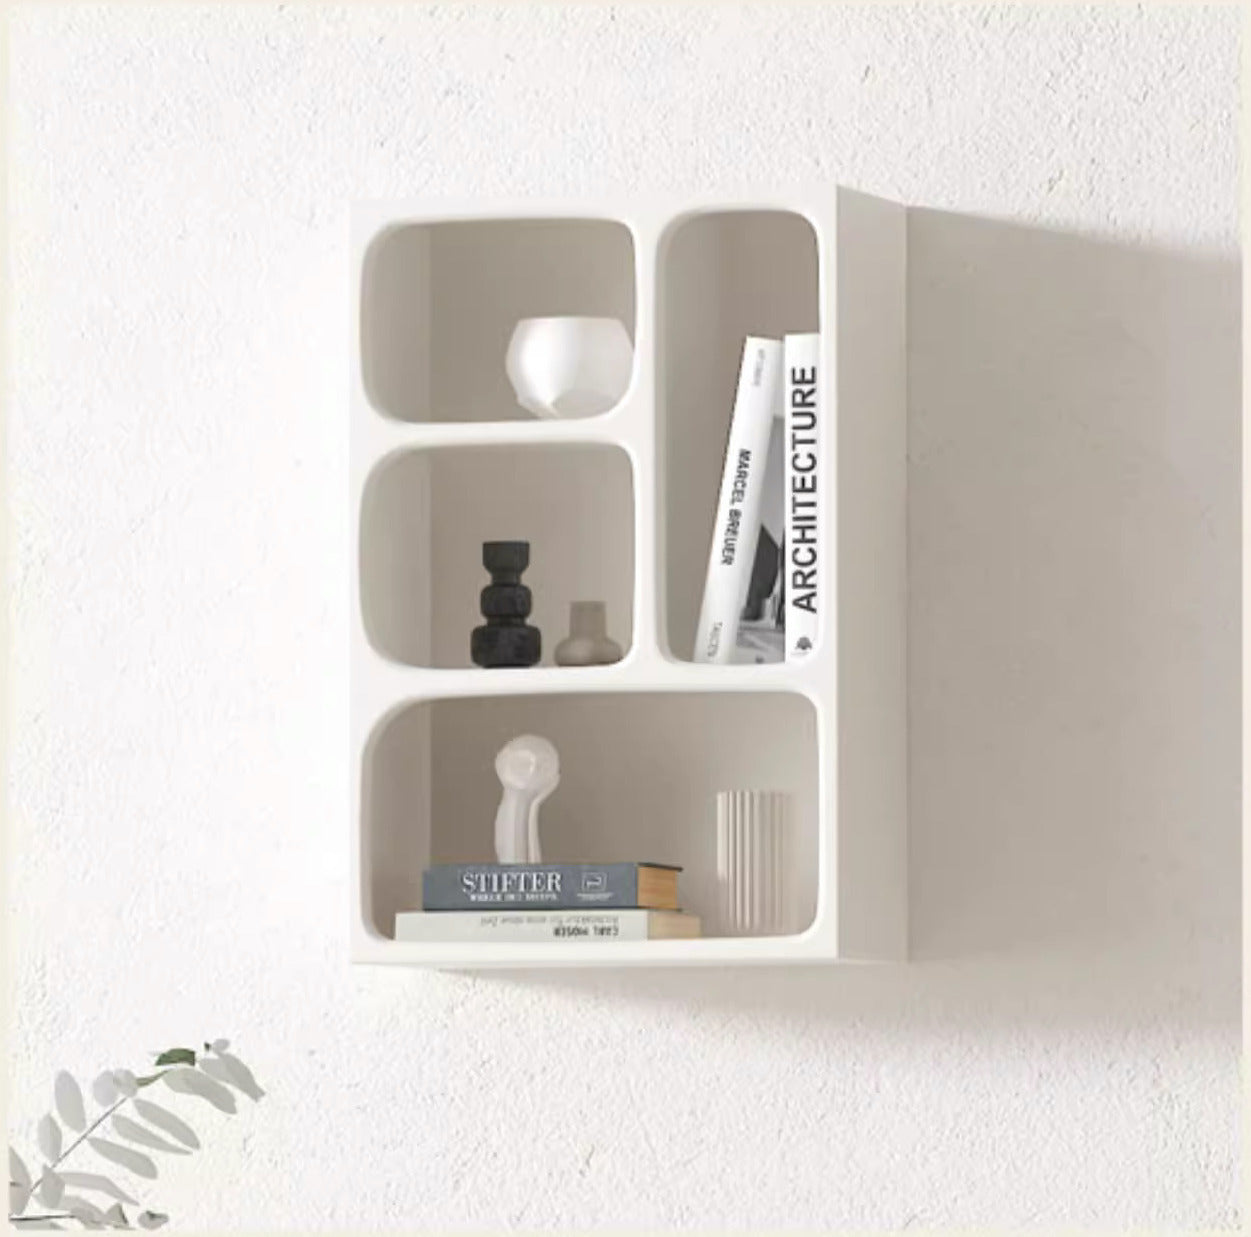 Floating White and Black Wall Mounted Shelves Textured Finished